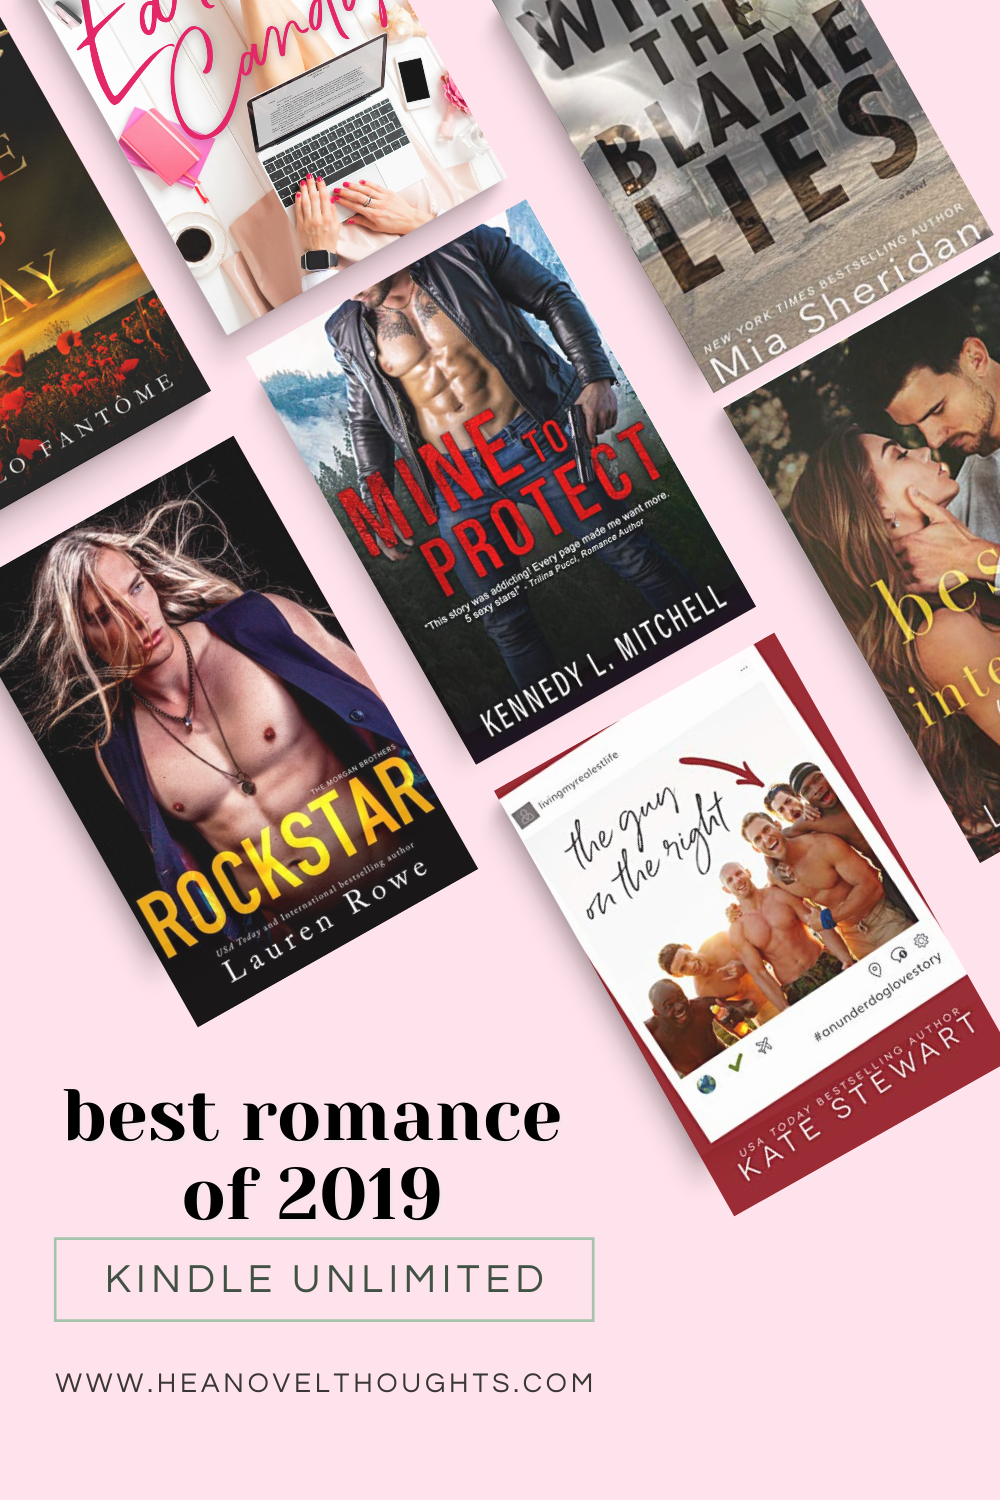 The Best Kindle Unlimited Romance Books of 2019